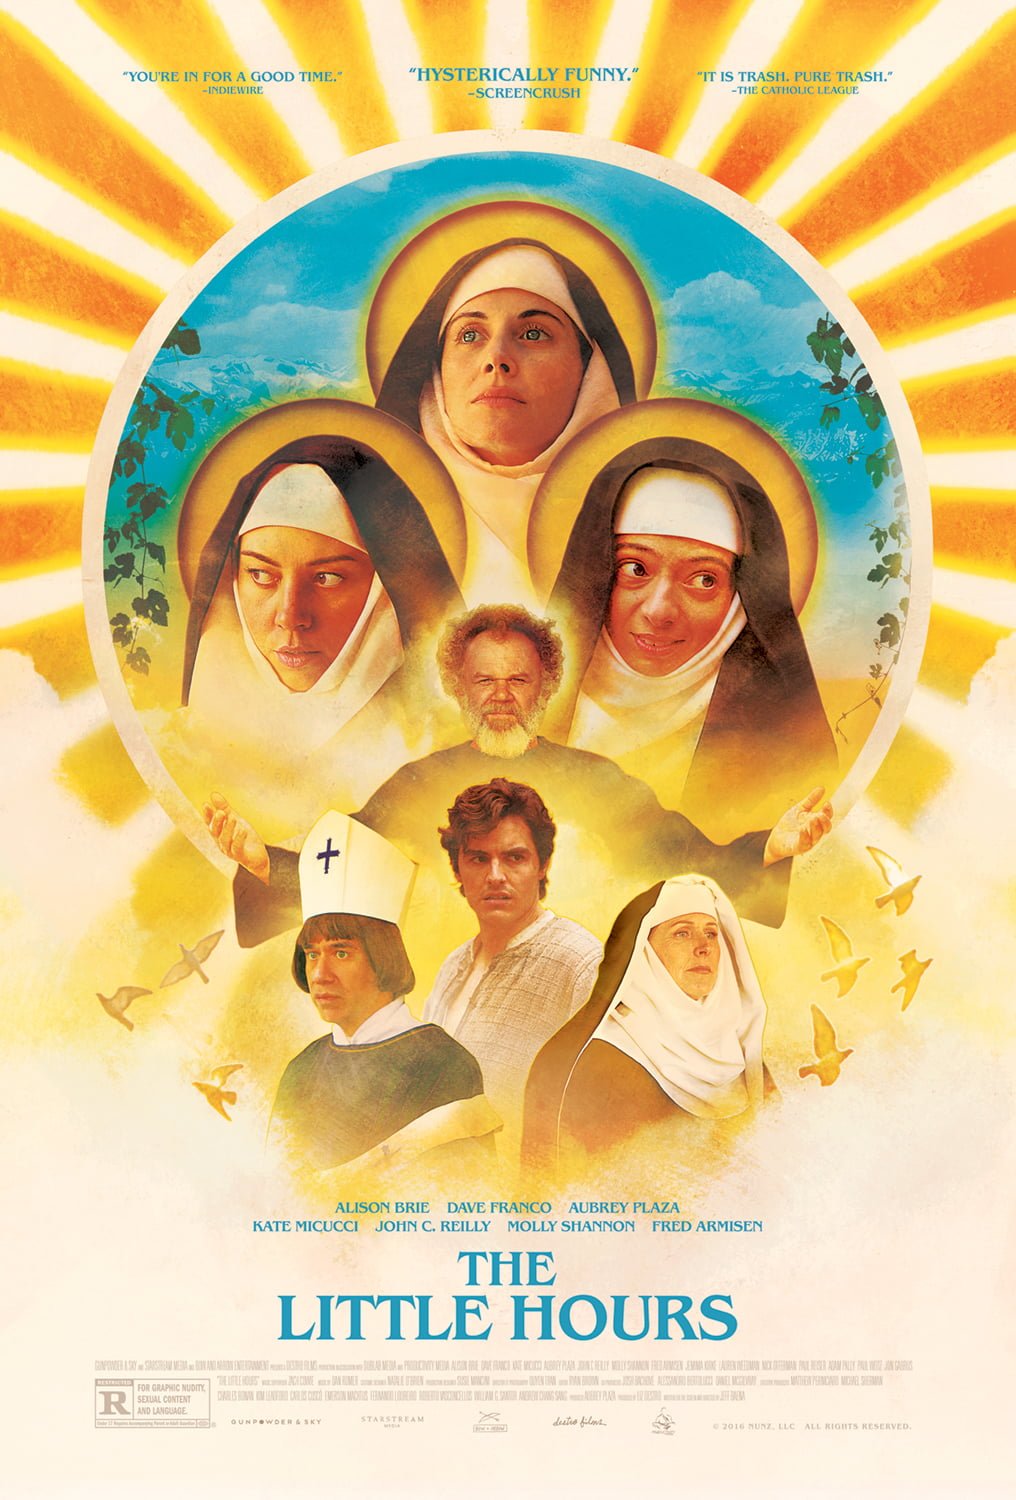 Alison Brie Source - The Little Hours